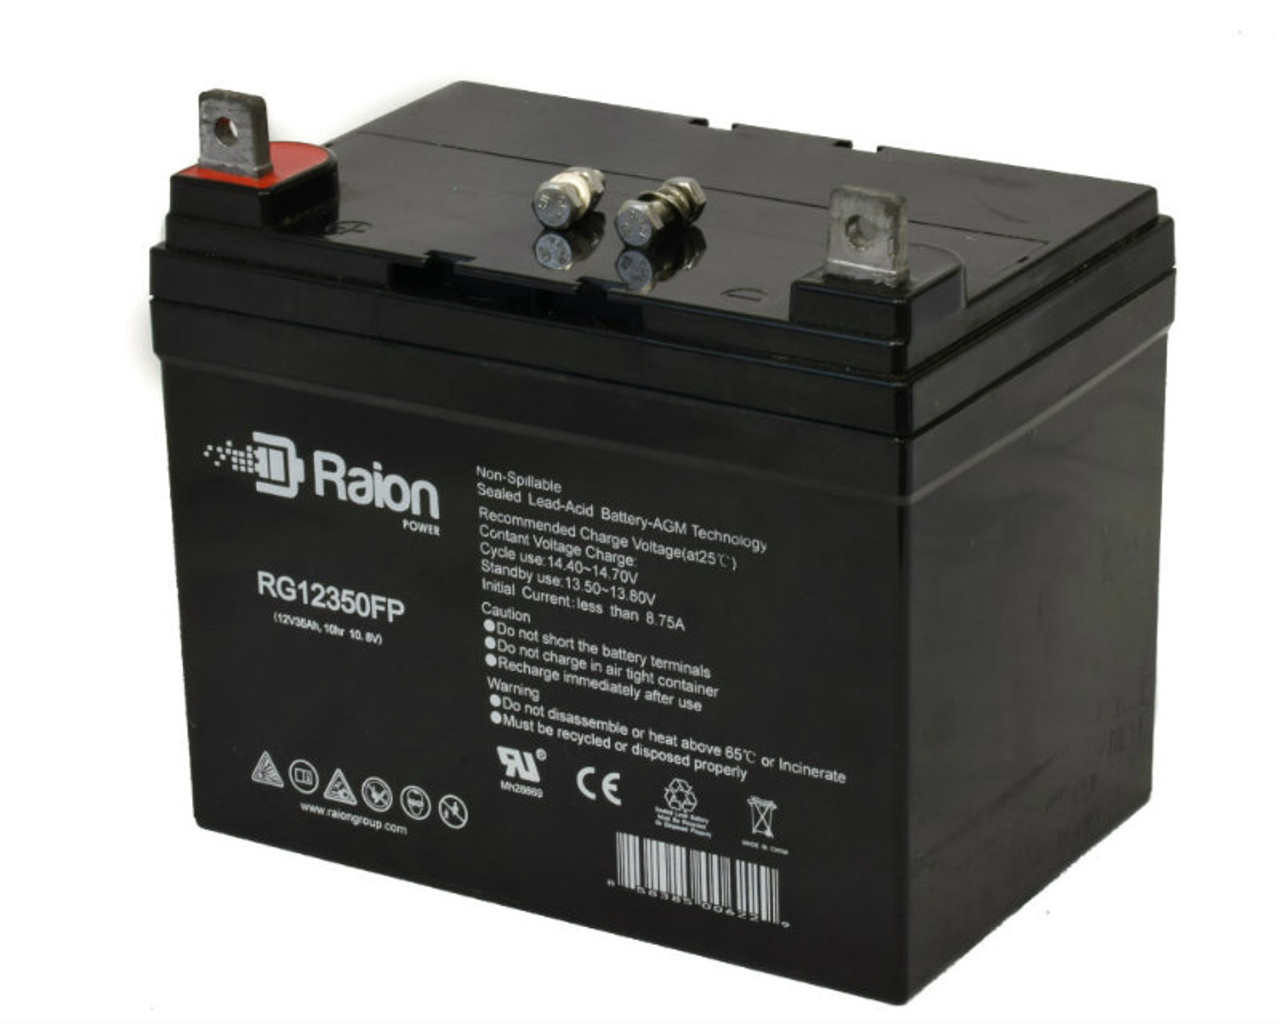 Raion Power Replacement 12V 35Ah RG12350FP Battery for Ingersoll Equipment 224